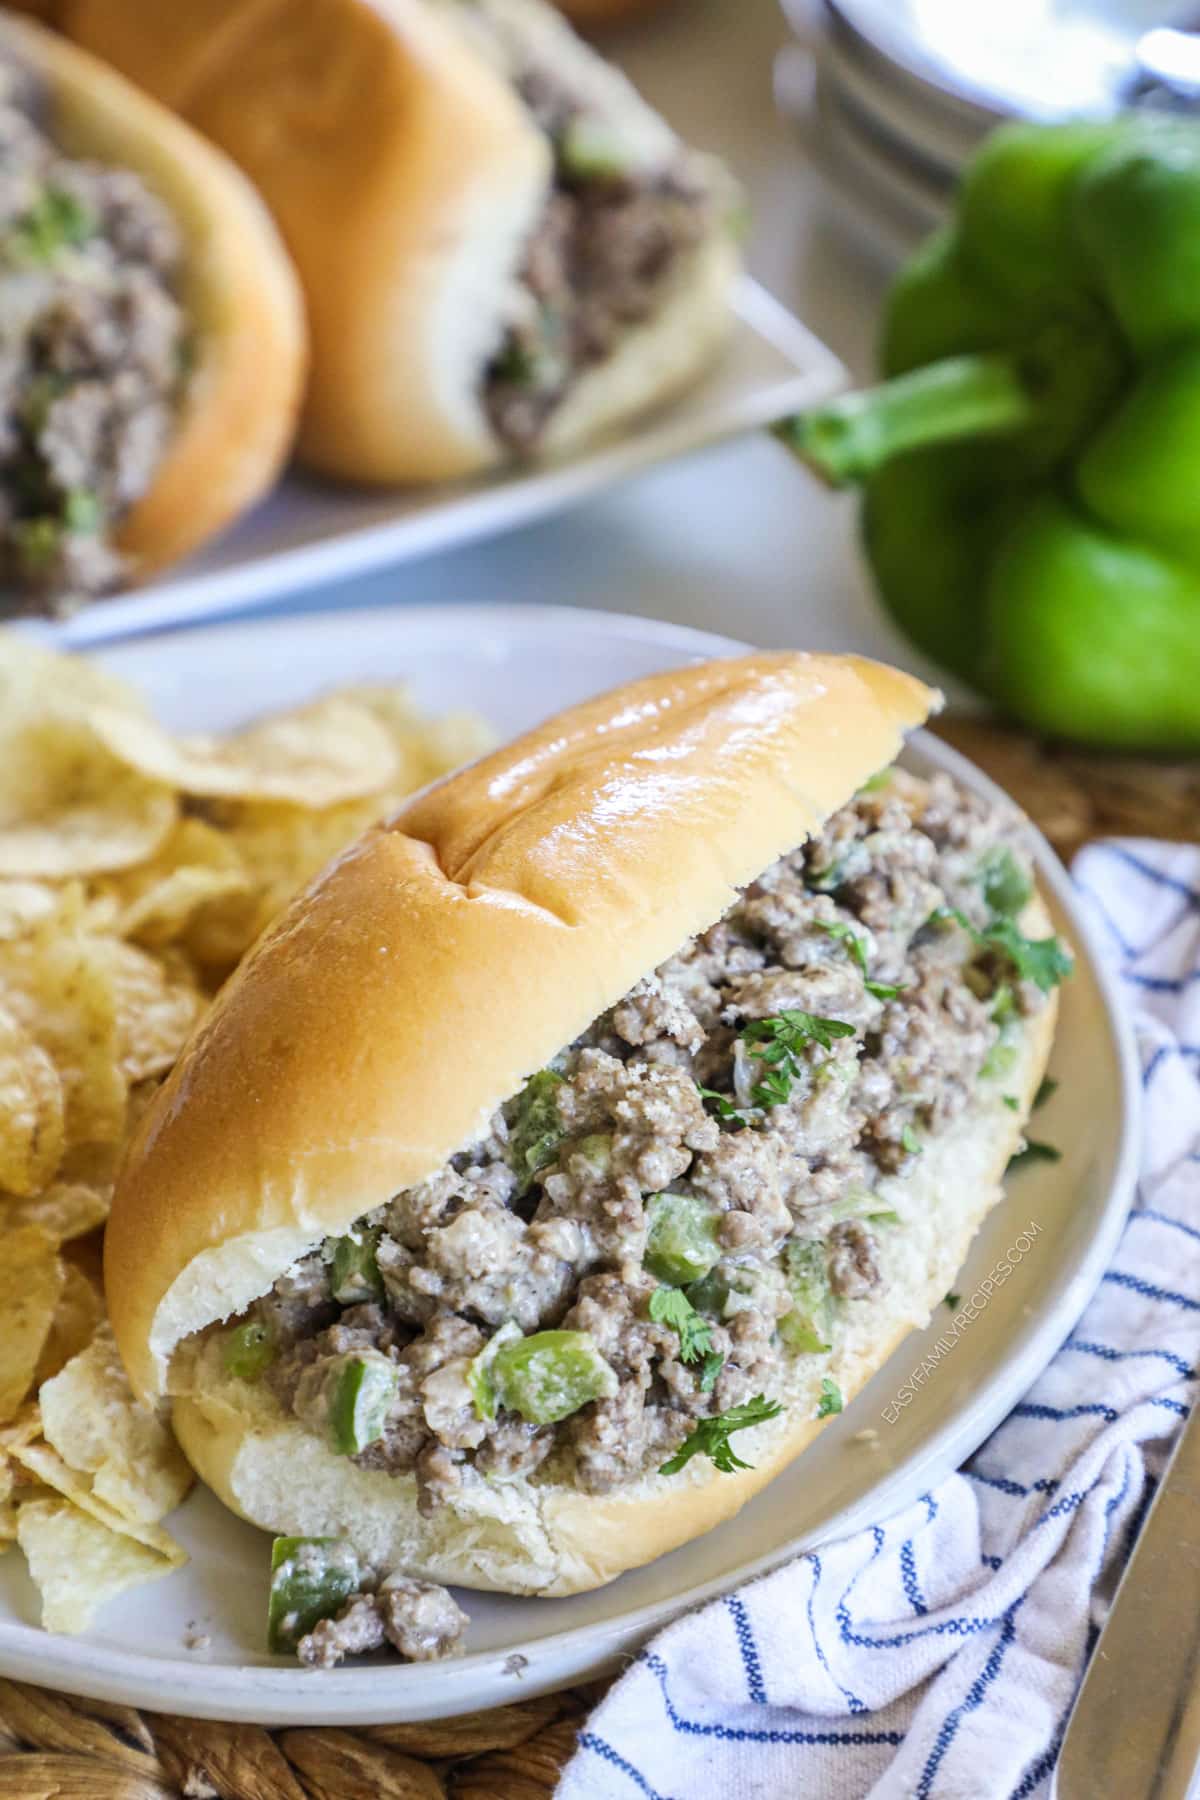 A ground beef philly cheesesteak sandwich on a plate with potato chips.